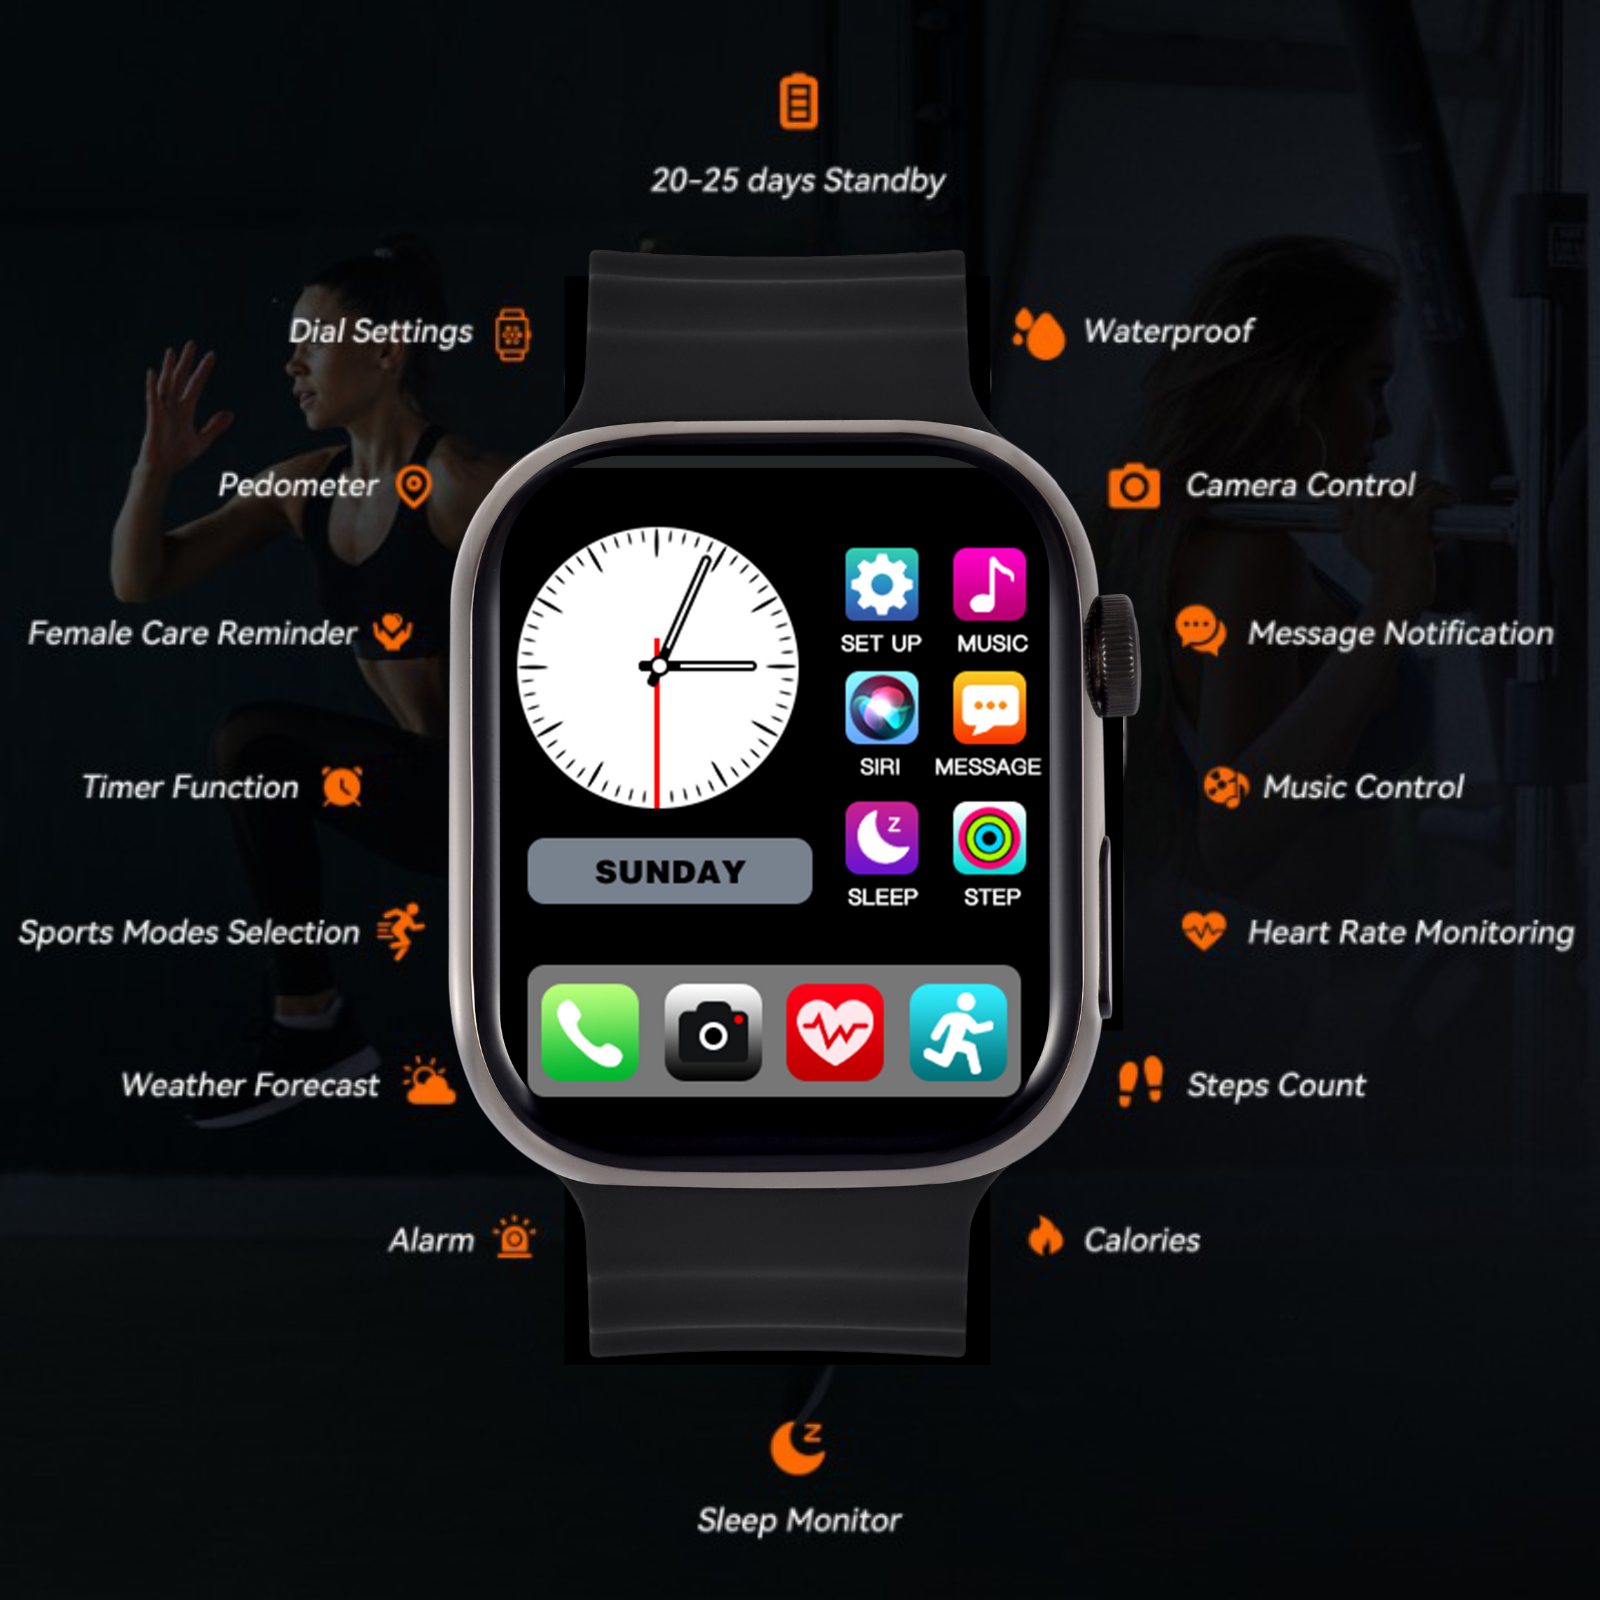 The Rise of Smartwatches in the Workplace